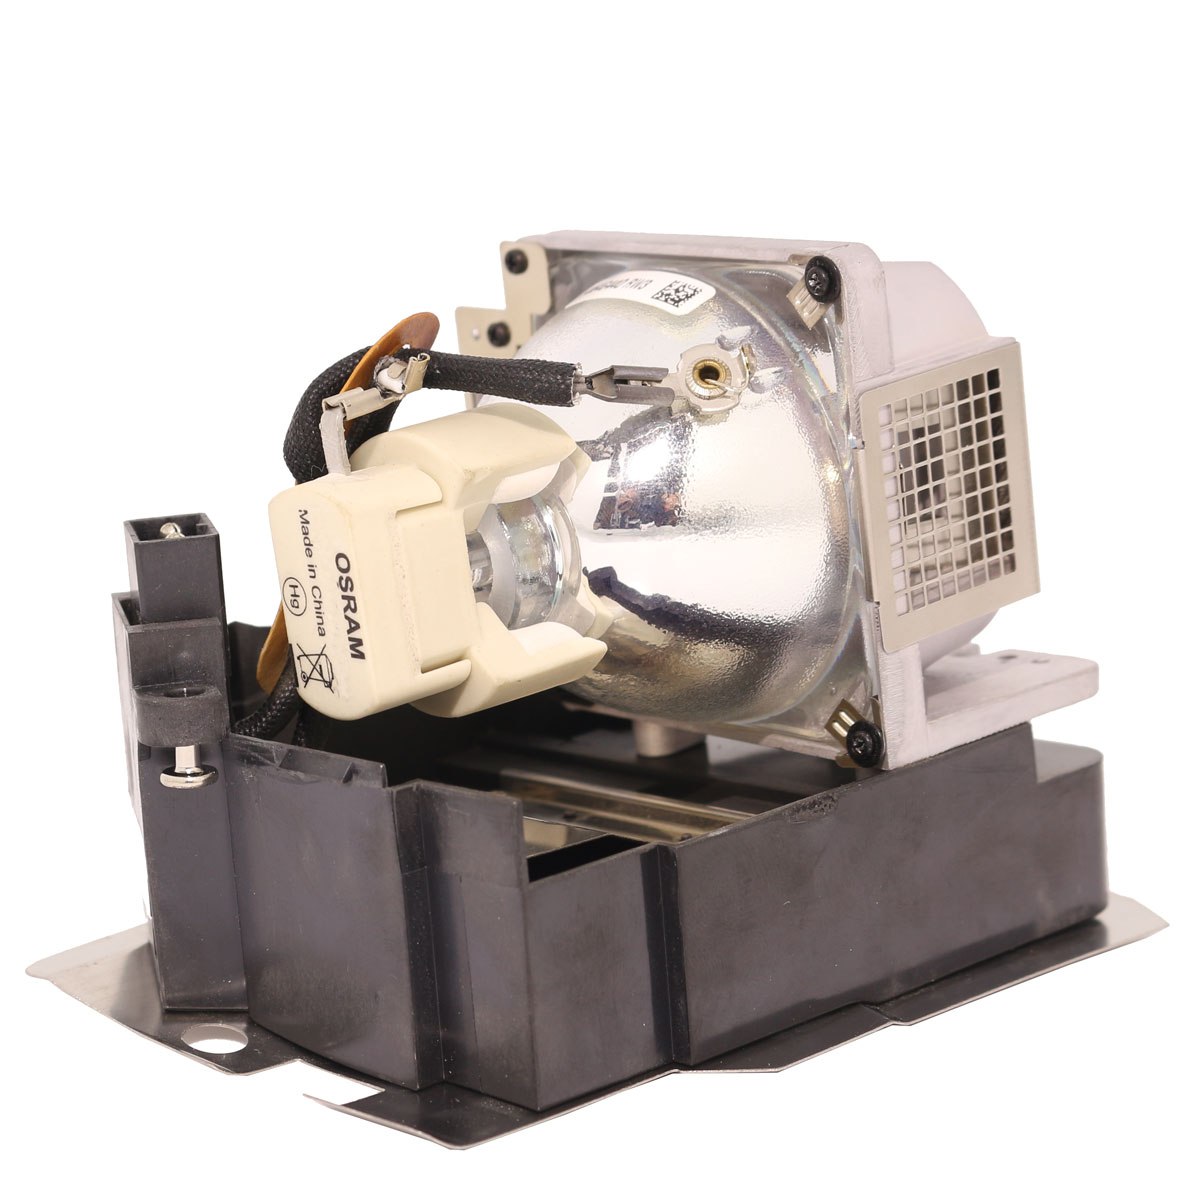 WD510U Mitsubishi Projector Lamp Replacement Projector Lamp Assembly with Genuine Original Osram P-VIP Bulb Inside. 